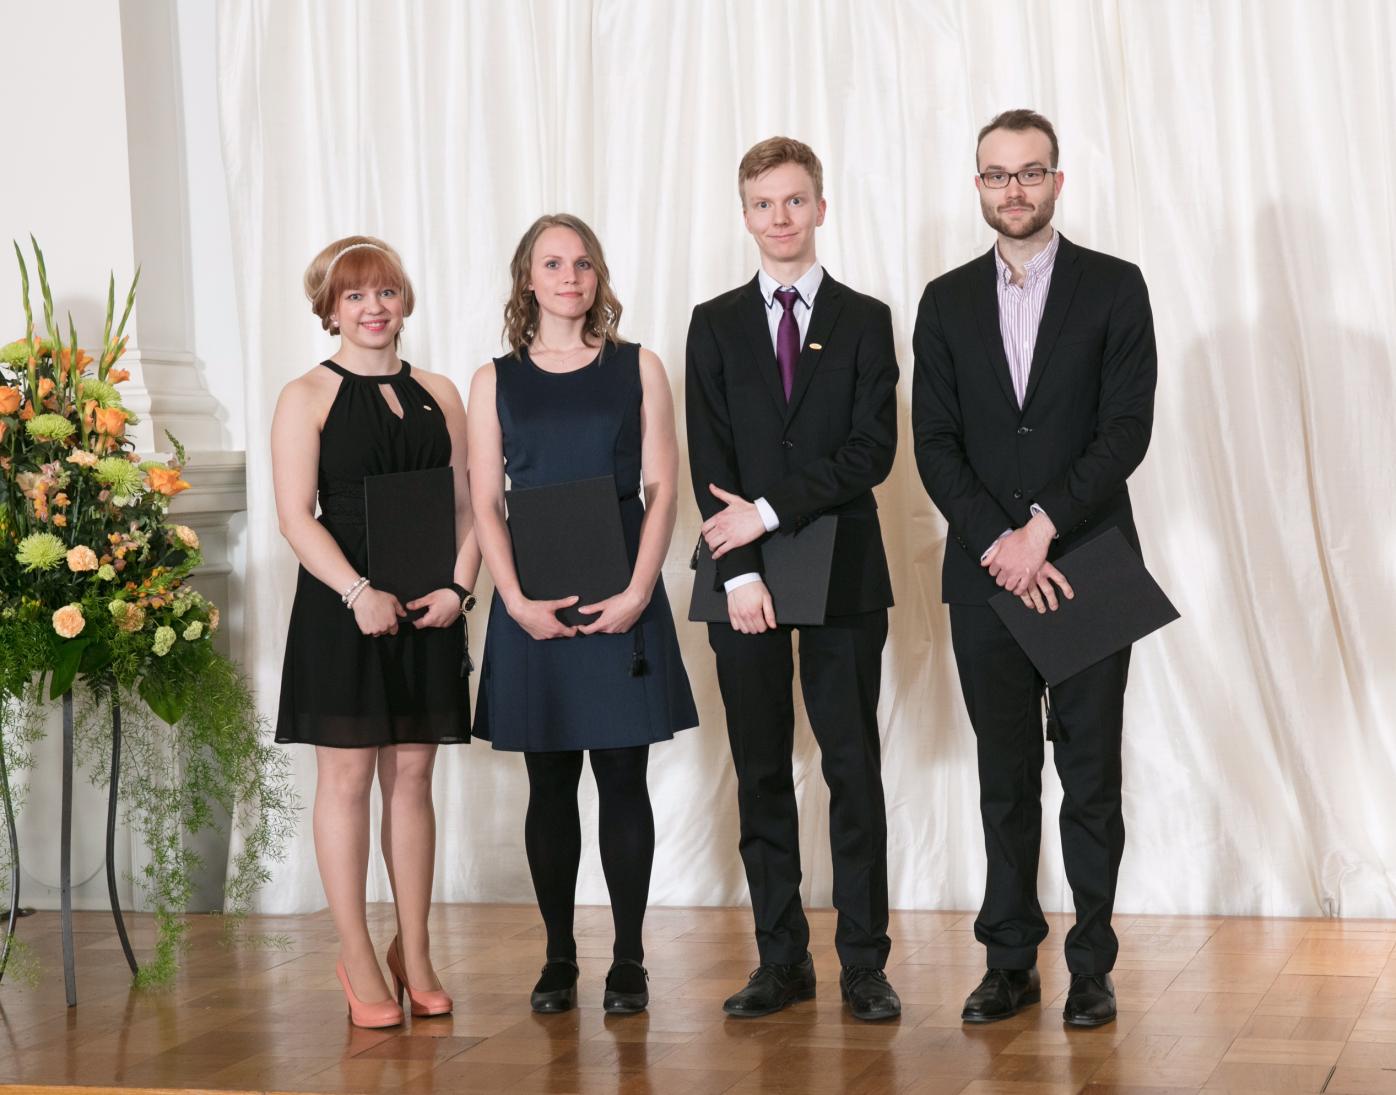 2017 Fulbright Finland Study of the U.S. Institutes for Student Leaders from Europe grantees with Fulbright Finland Underdraduate grantee at the Award Ceremony